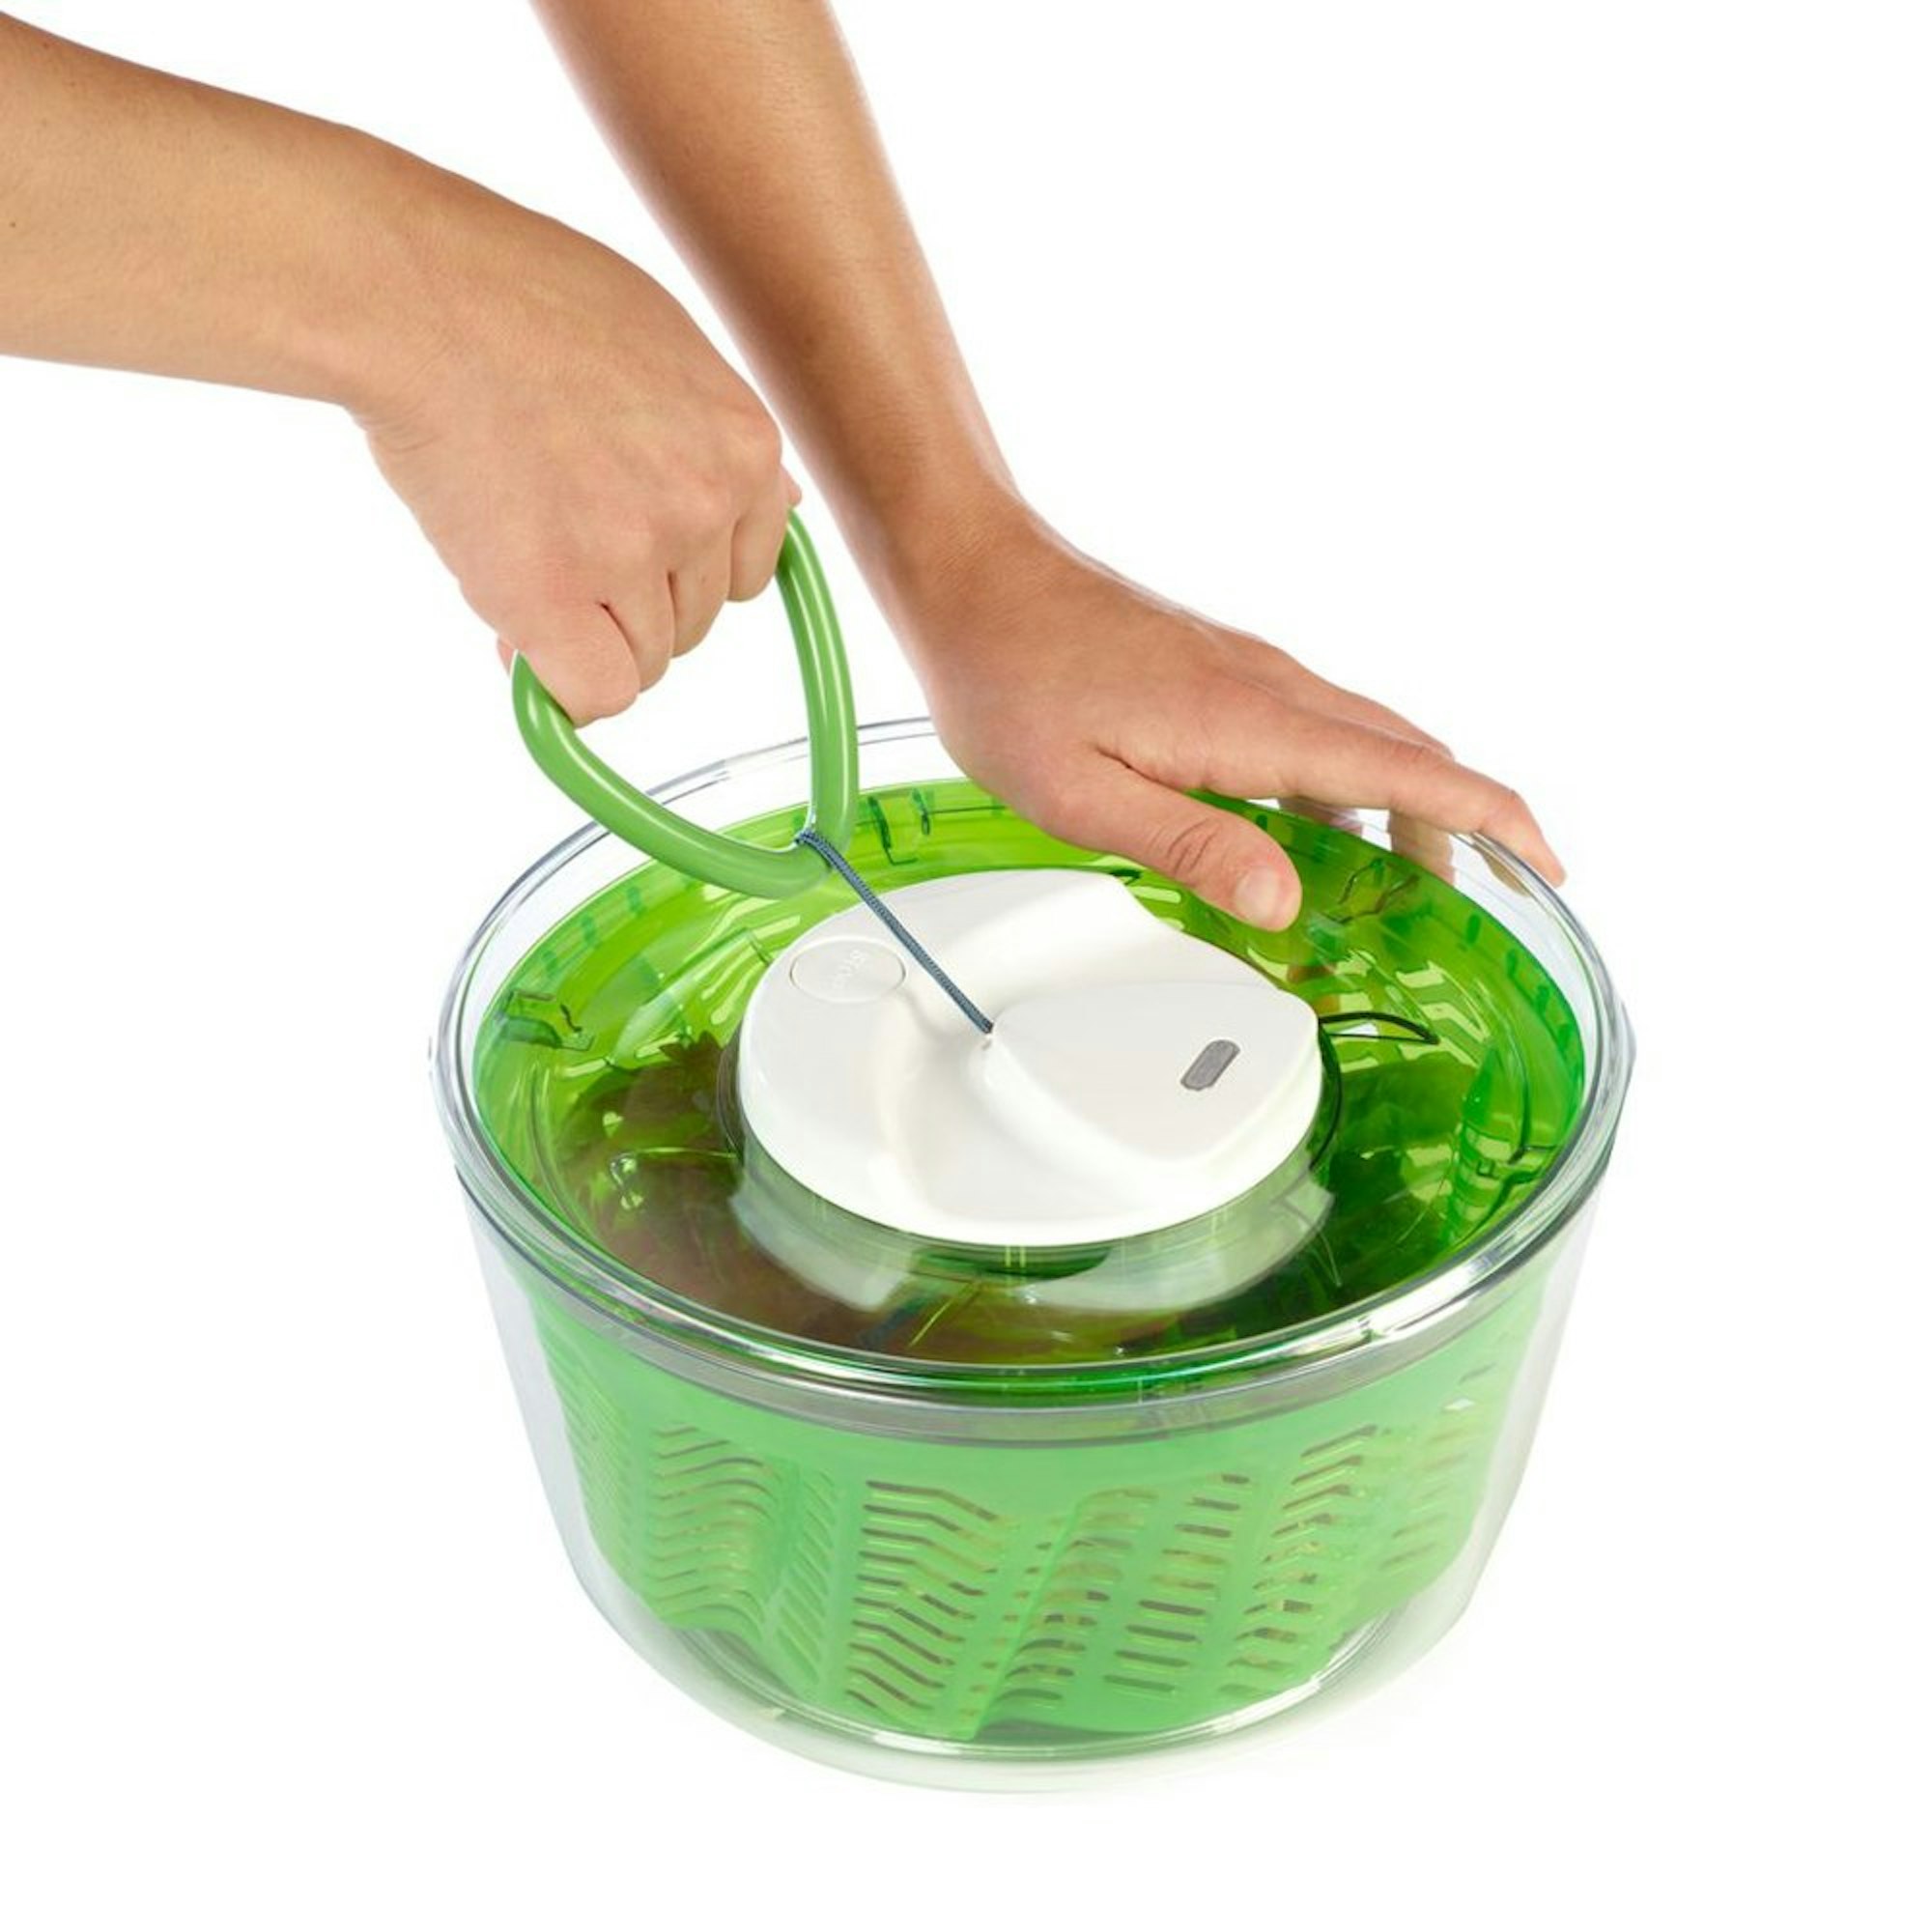 Salad spinner with ring pull action